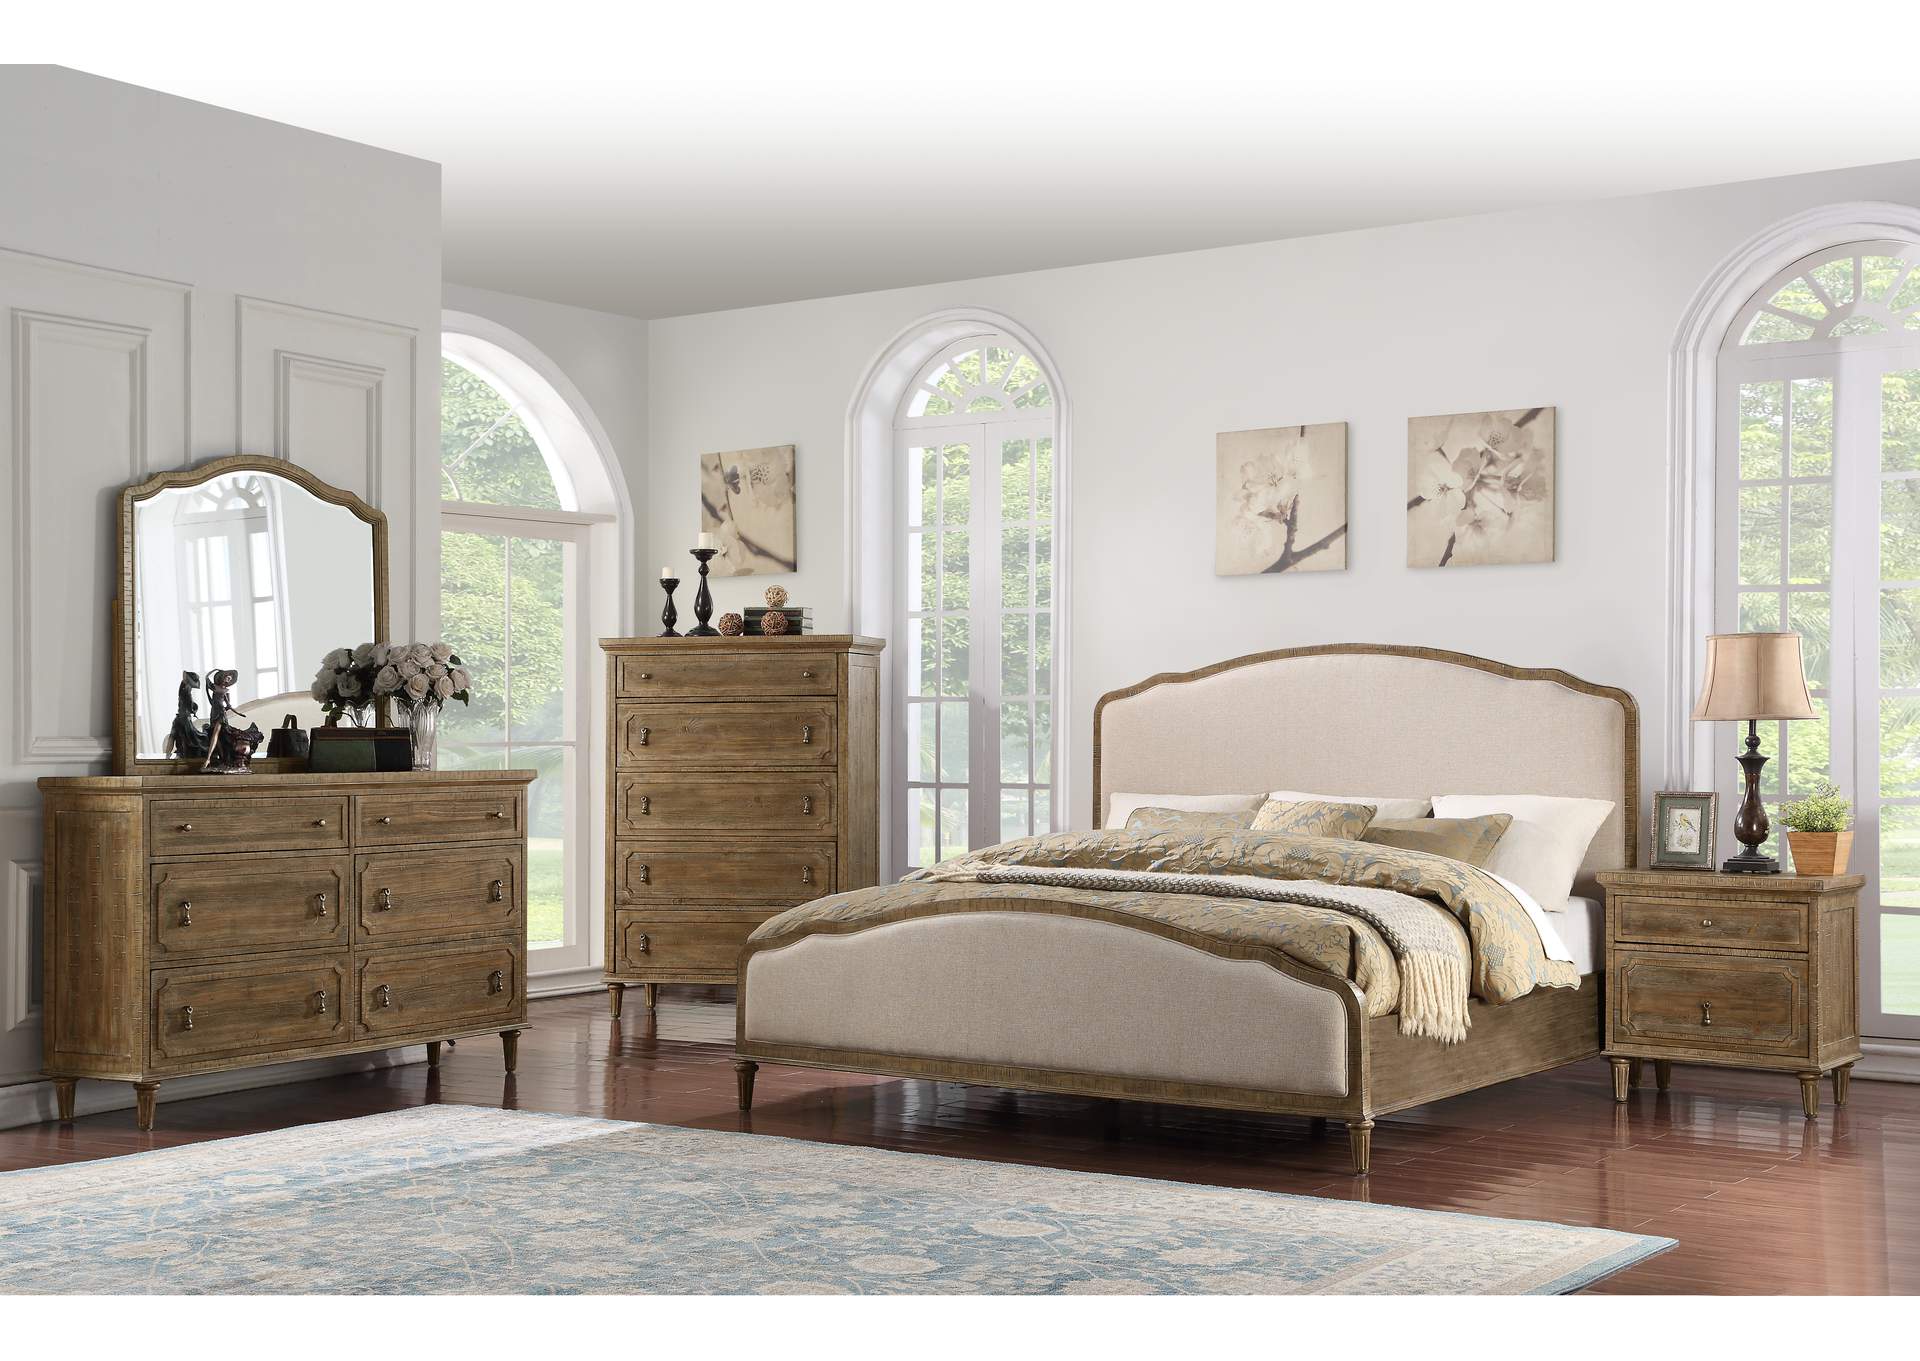 Interlude King Upholstered Bed,Emerald Home Furnishings